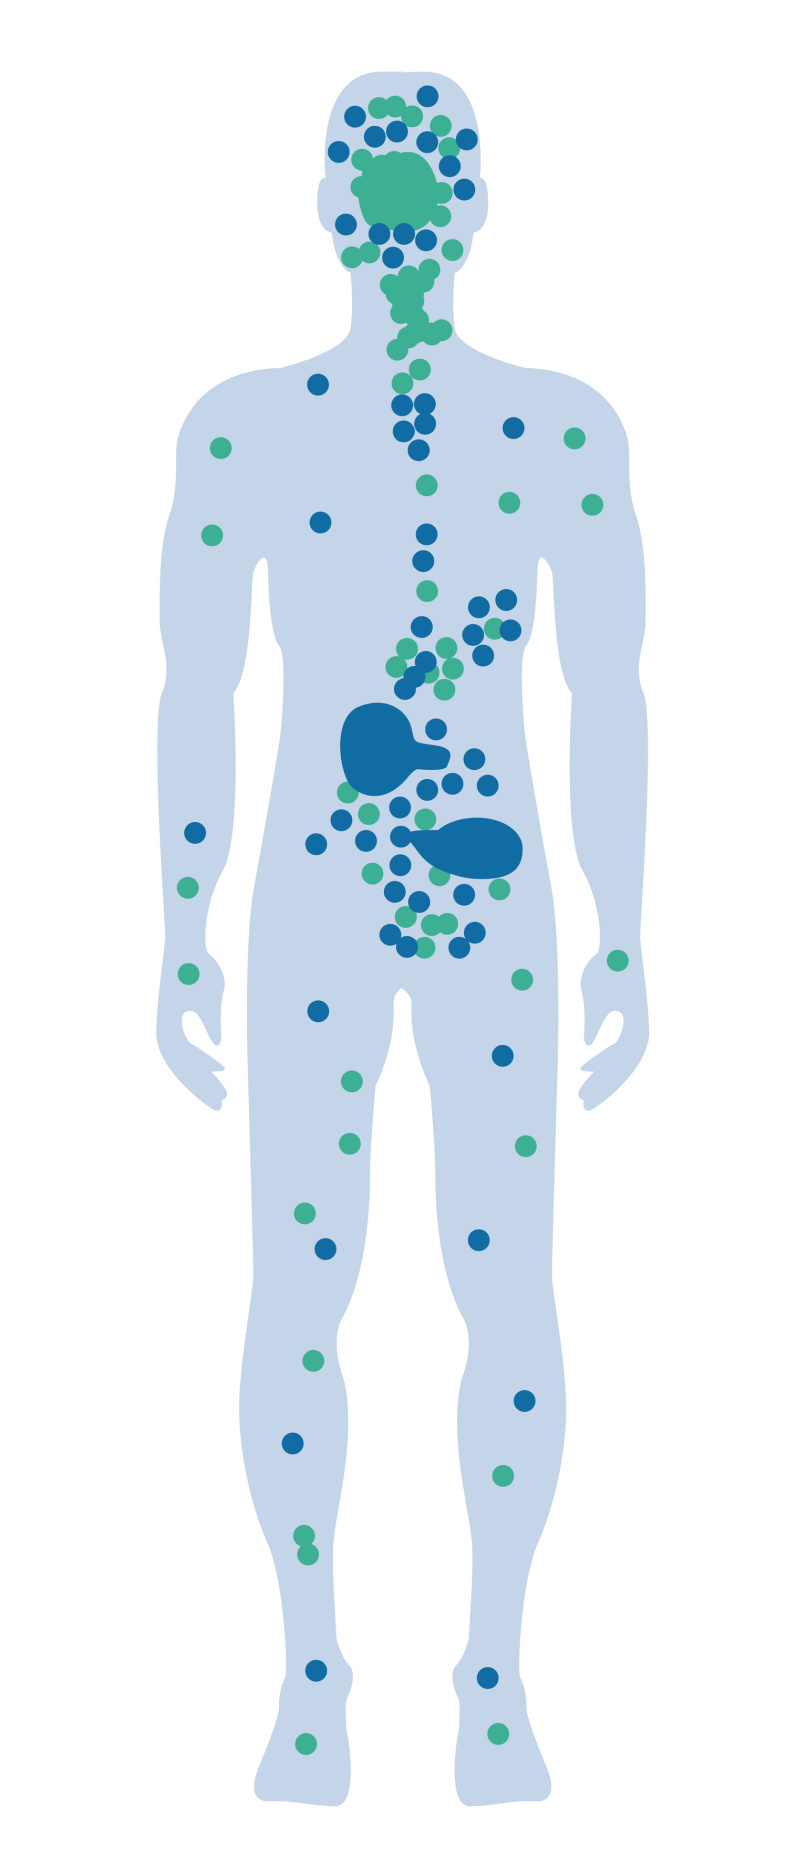 Outline of a human showing the CB receptors in the body.